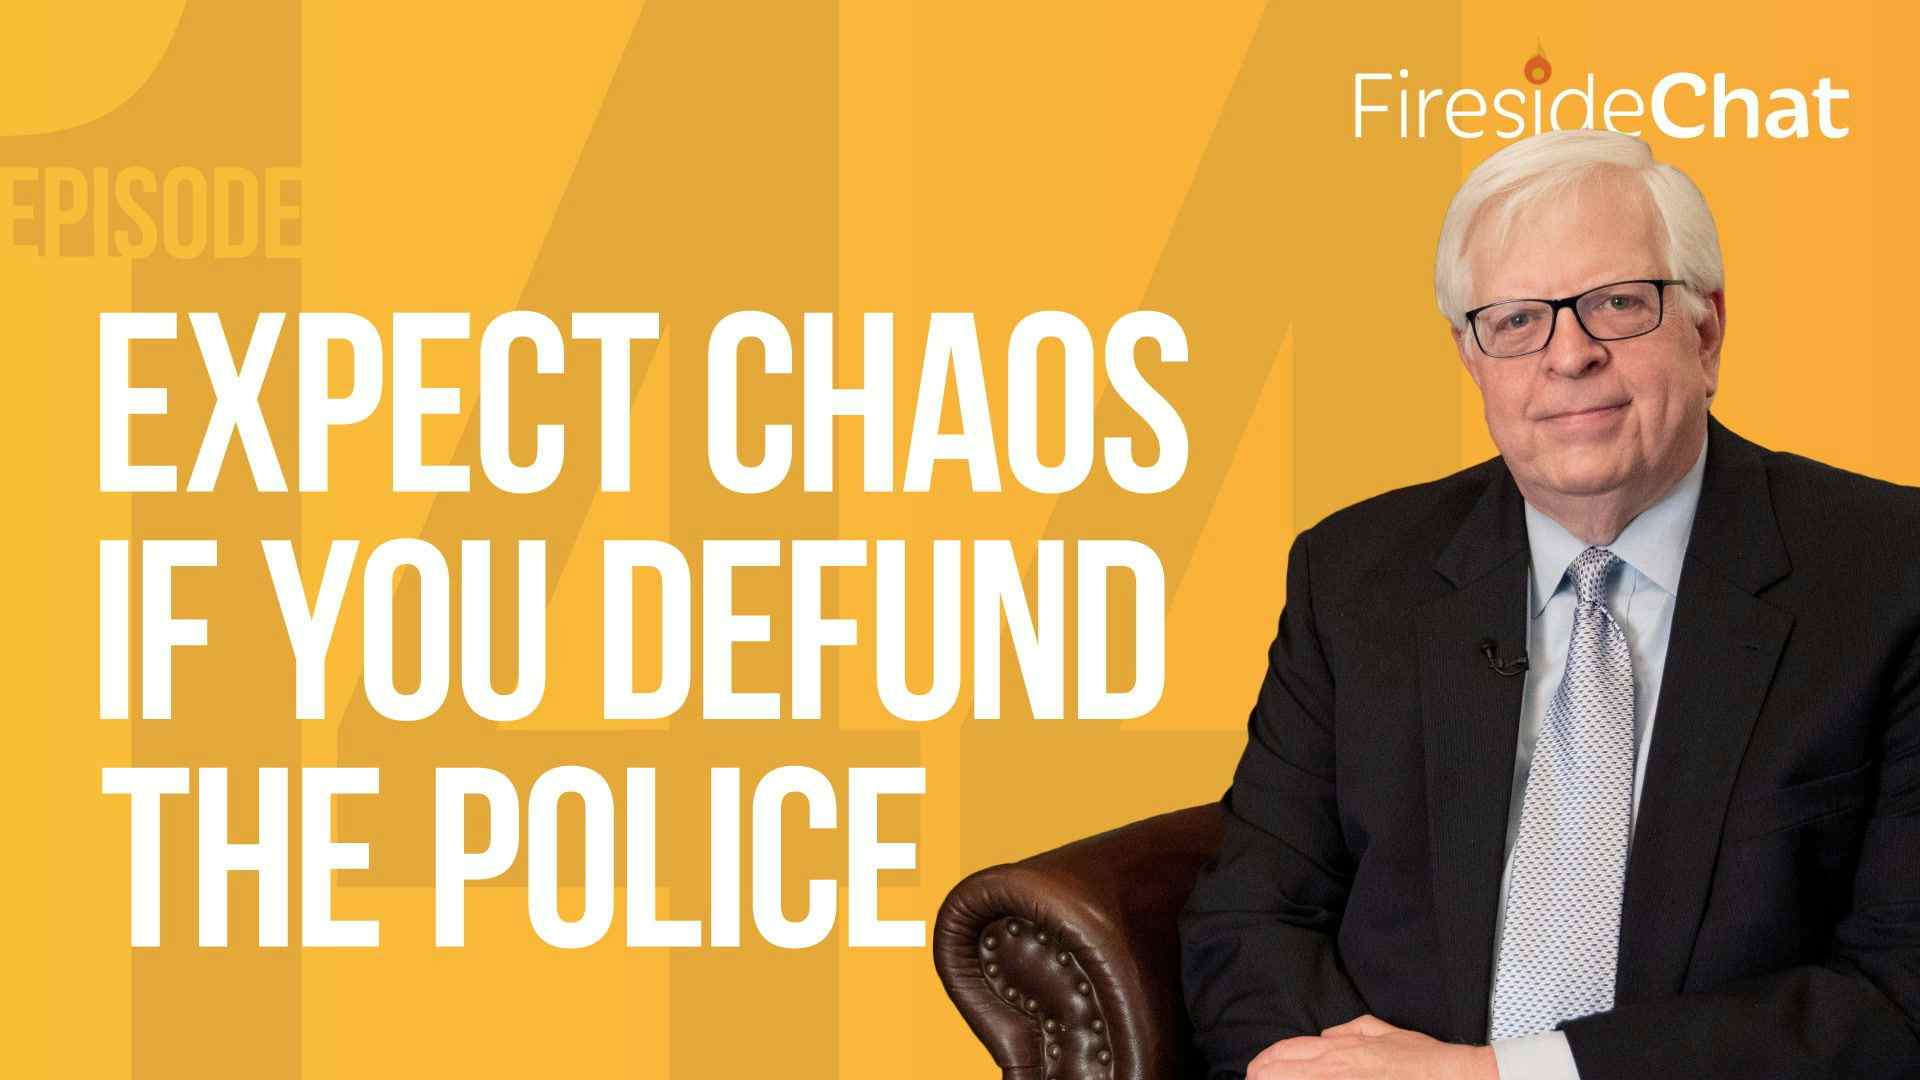 Ep. 144 — Expect Chaos If You Defund the Police